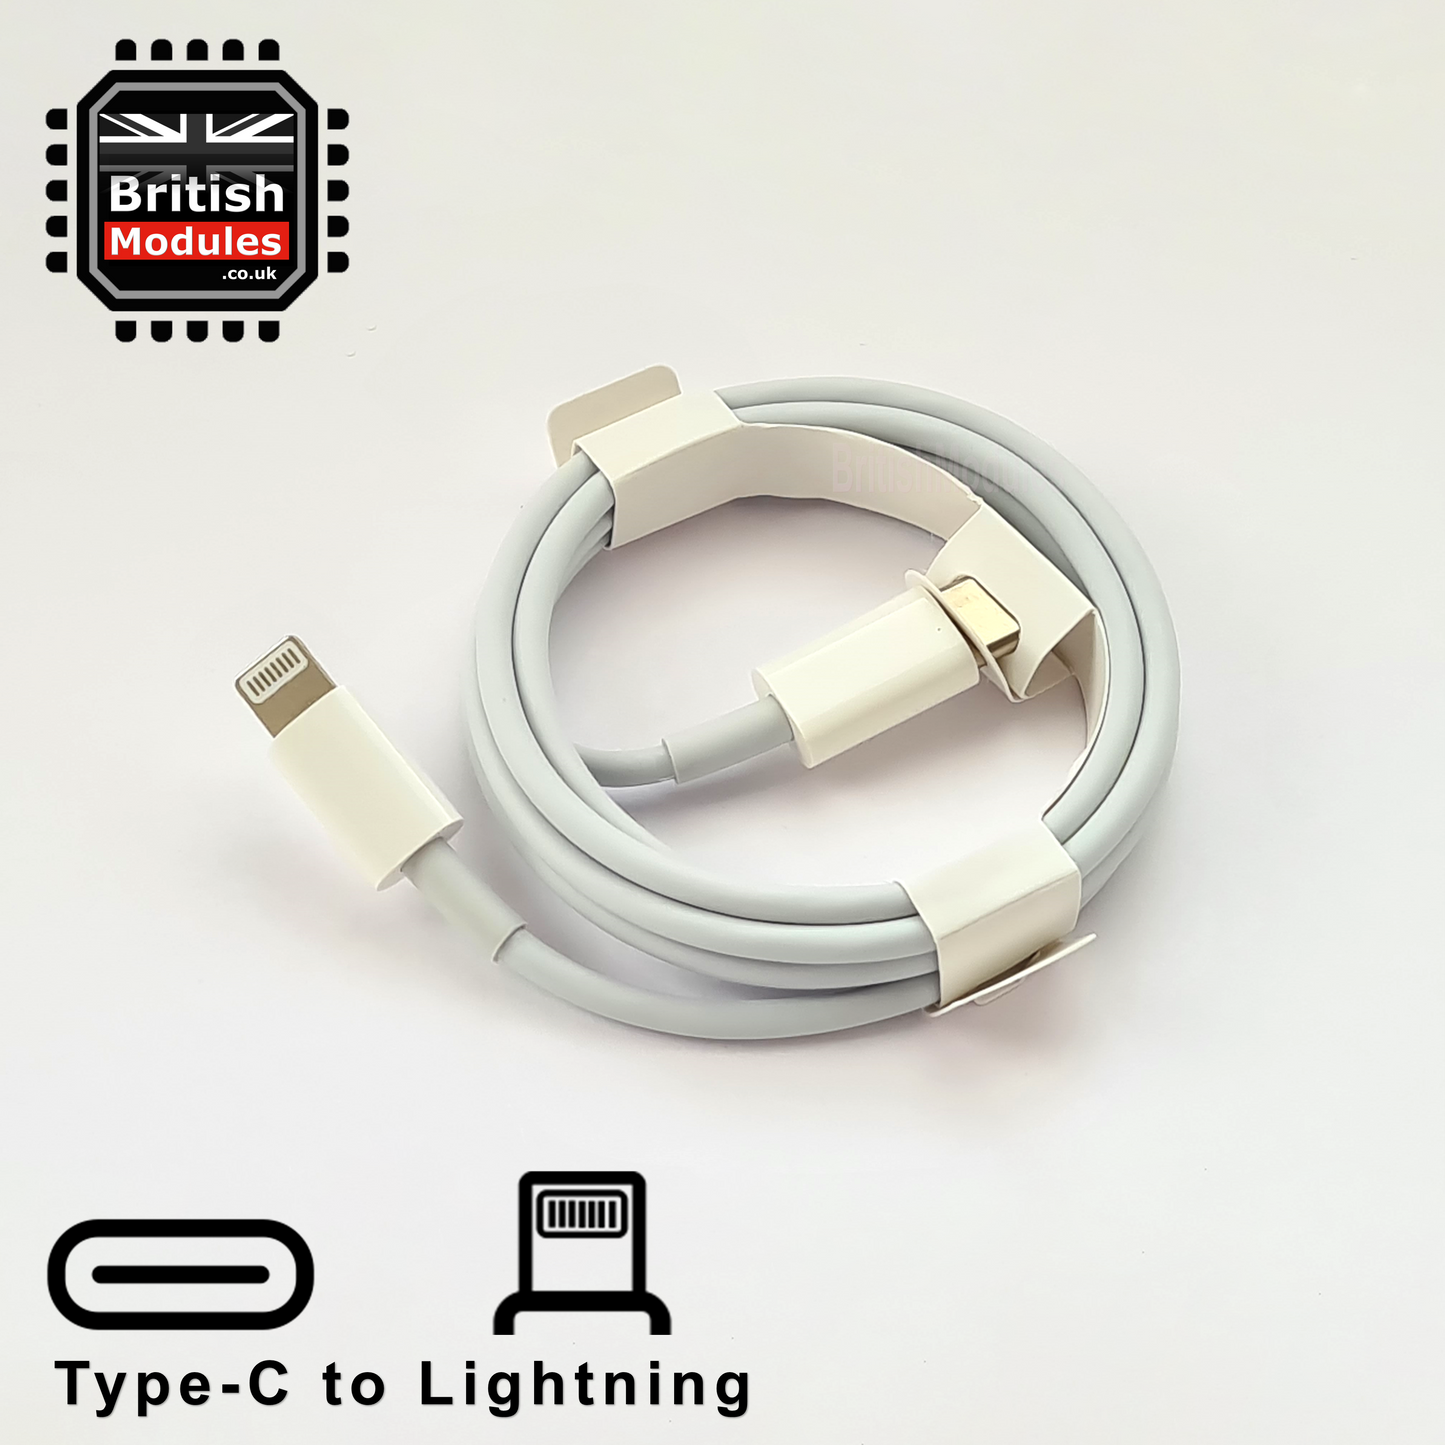 18W USB C Power Adapter UK Plug + USB-C to Lightning Cable for iPhone / iPad Pro Air